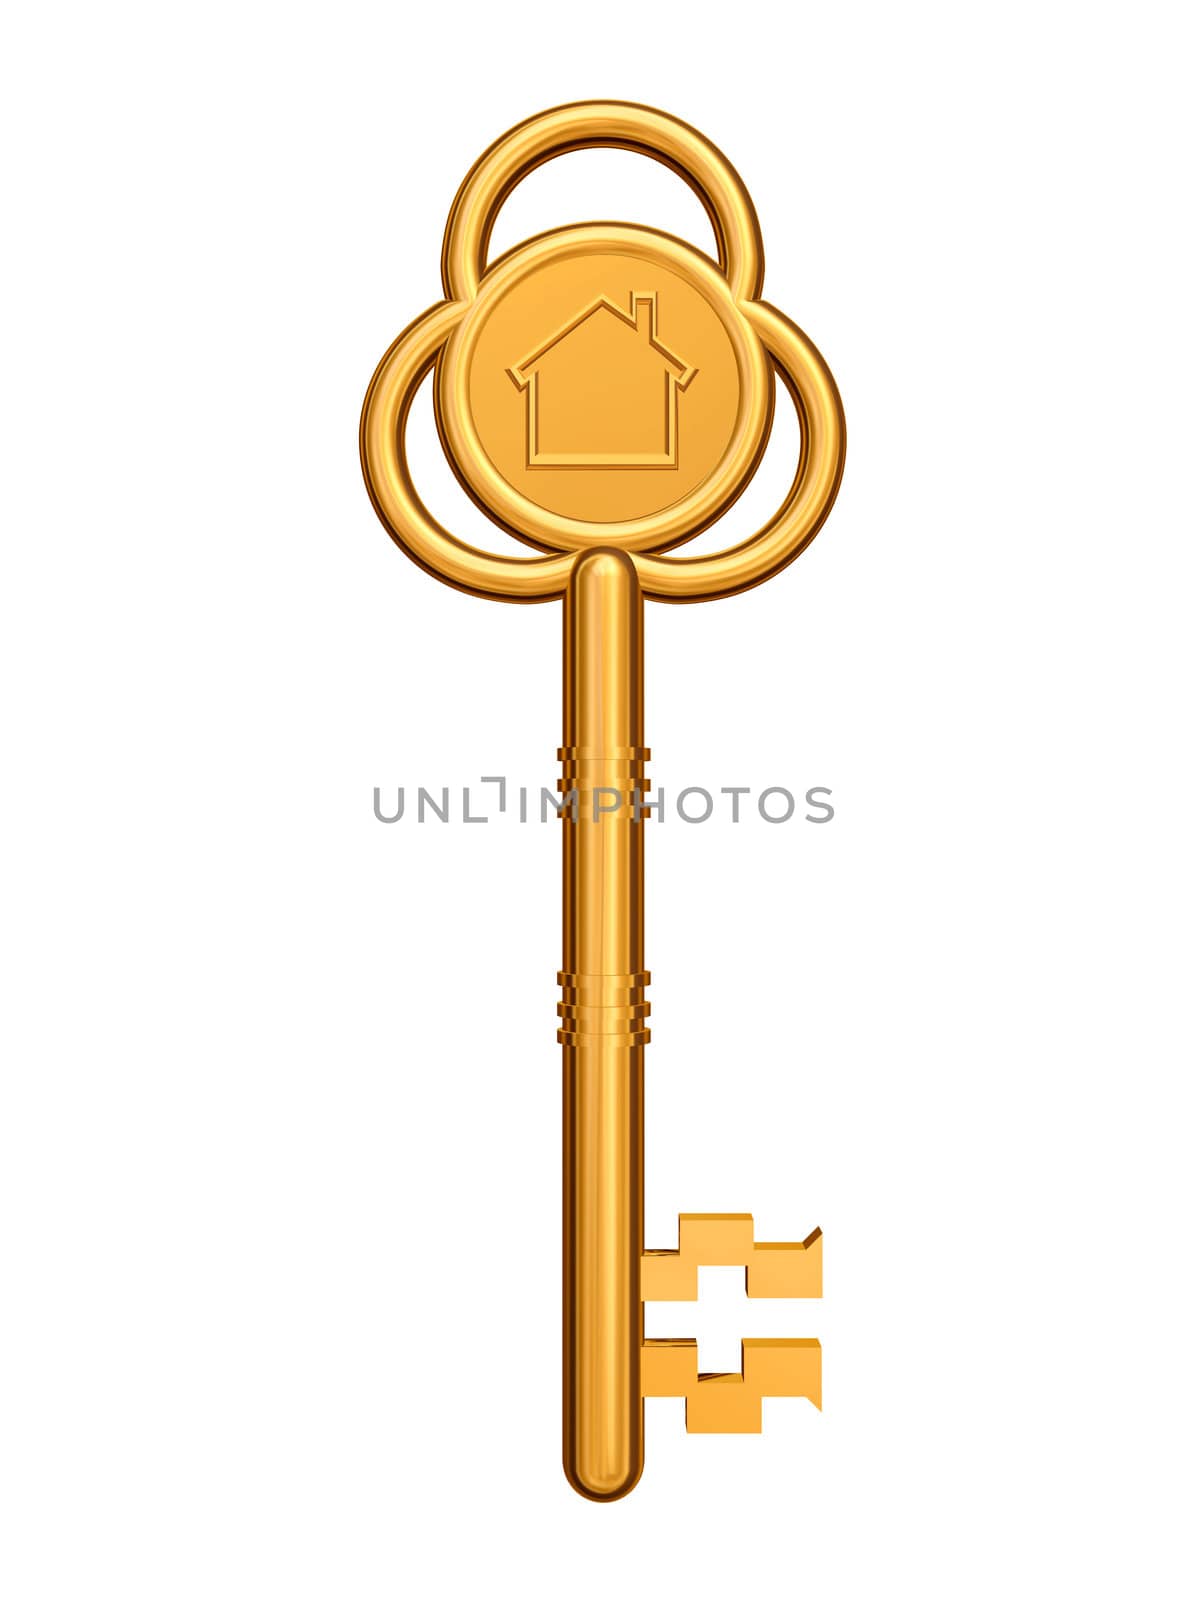 3d golden key with house symbol isolated